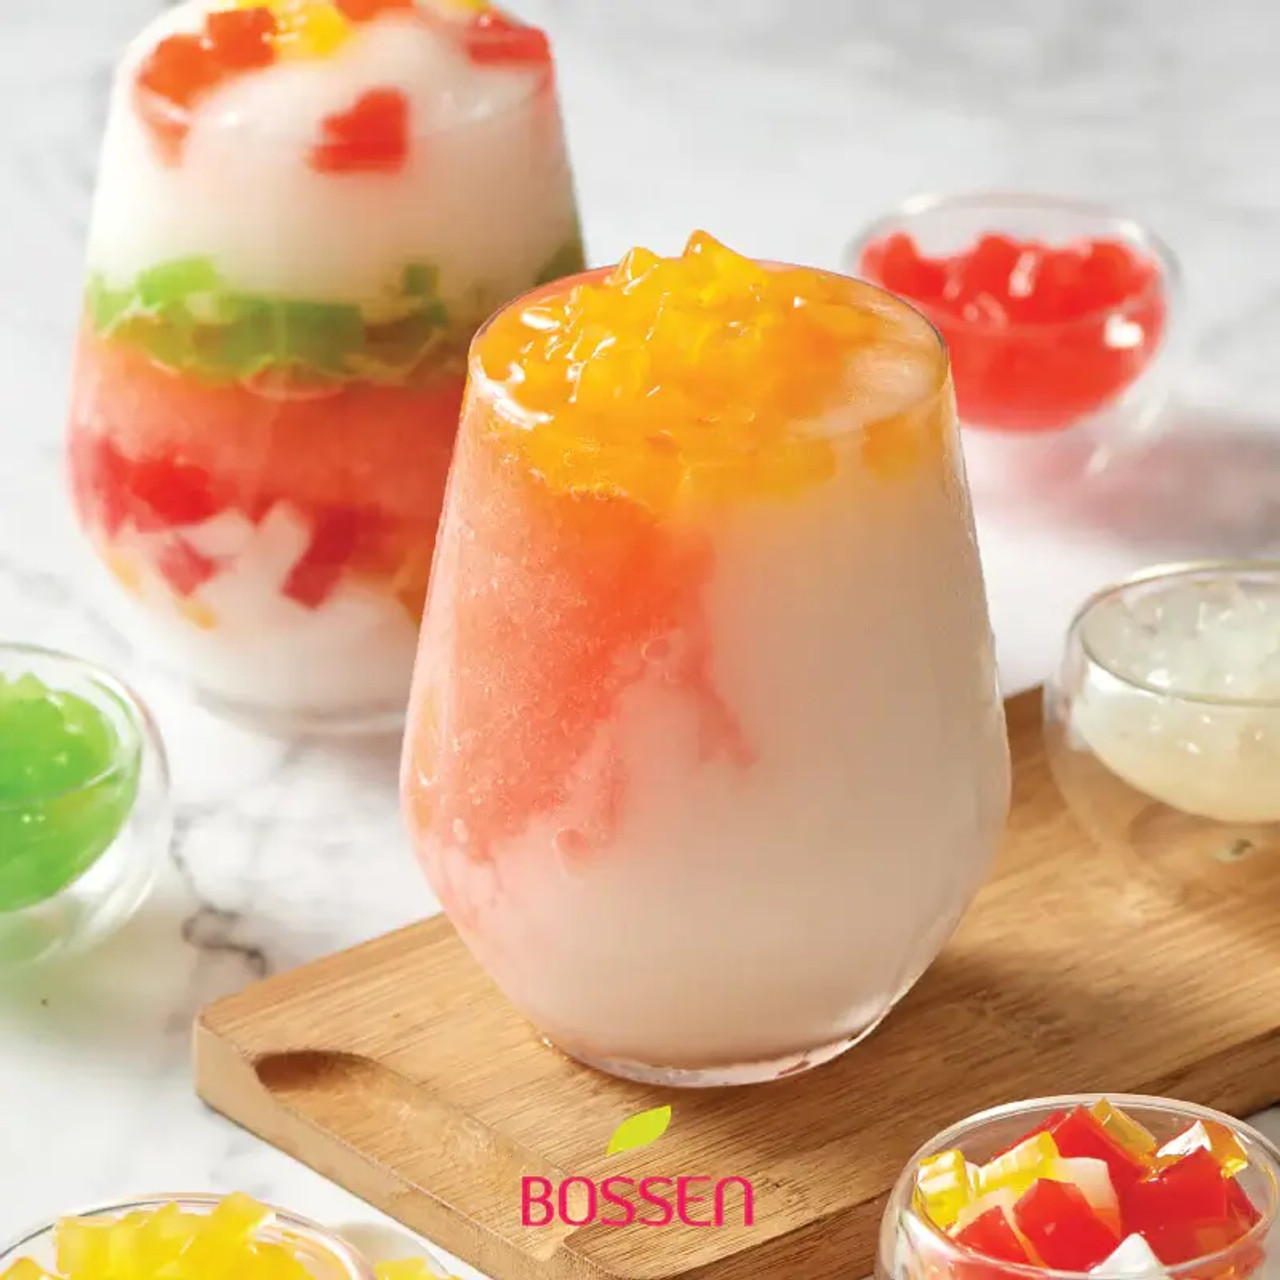 Bossen Assorted Rainbow Jelly Topping 8.38 lb. (3.8 kg) - 4/Case | Sweet Sugar-Chicken Pieces